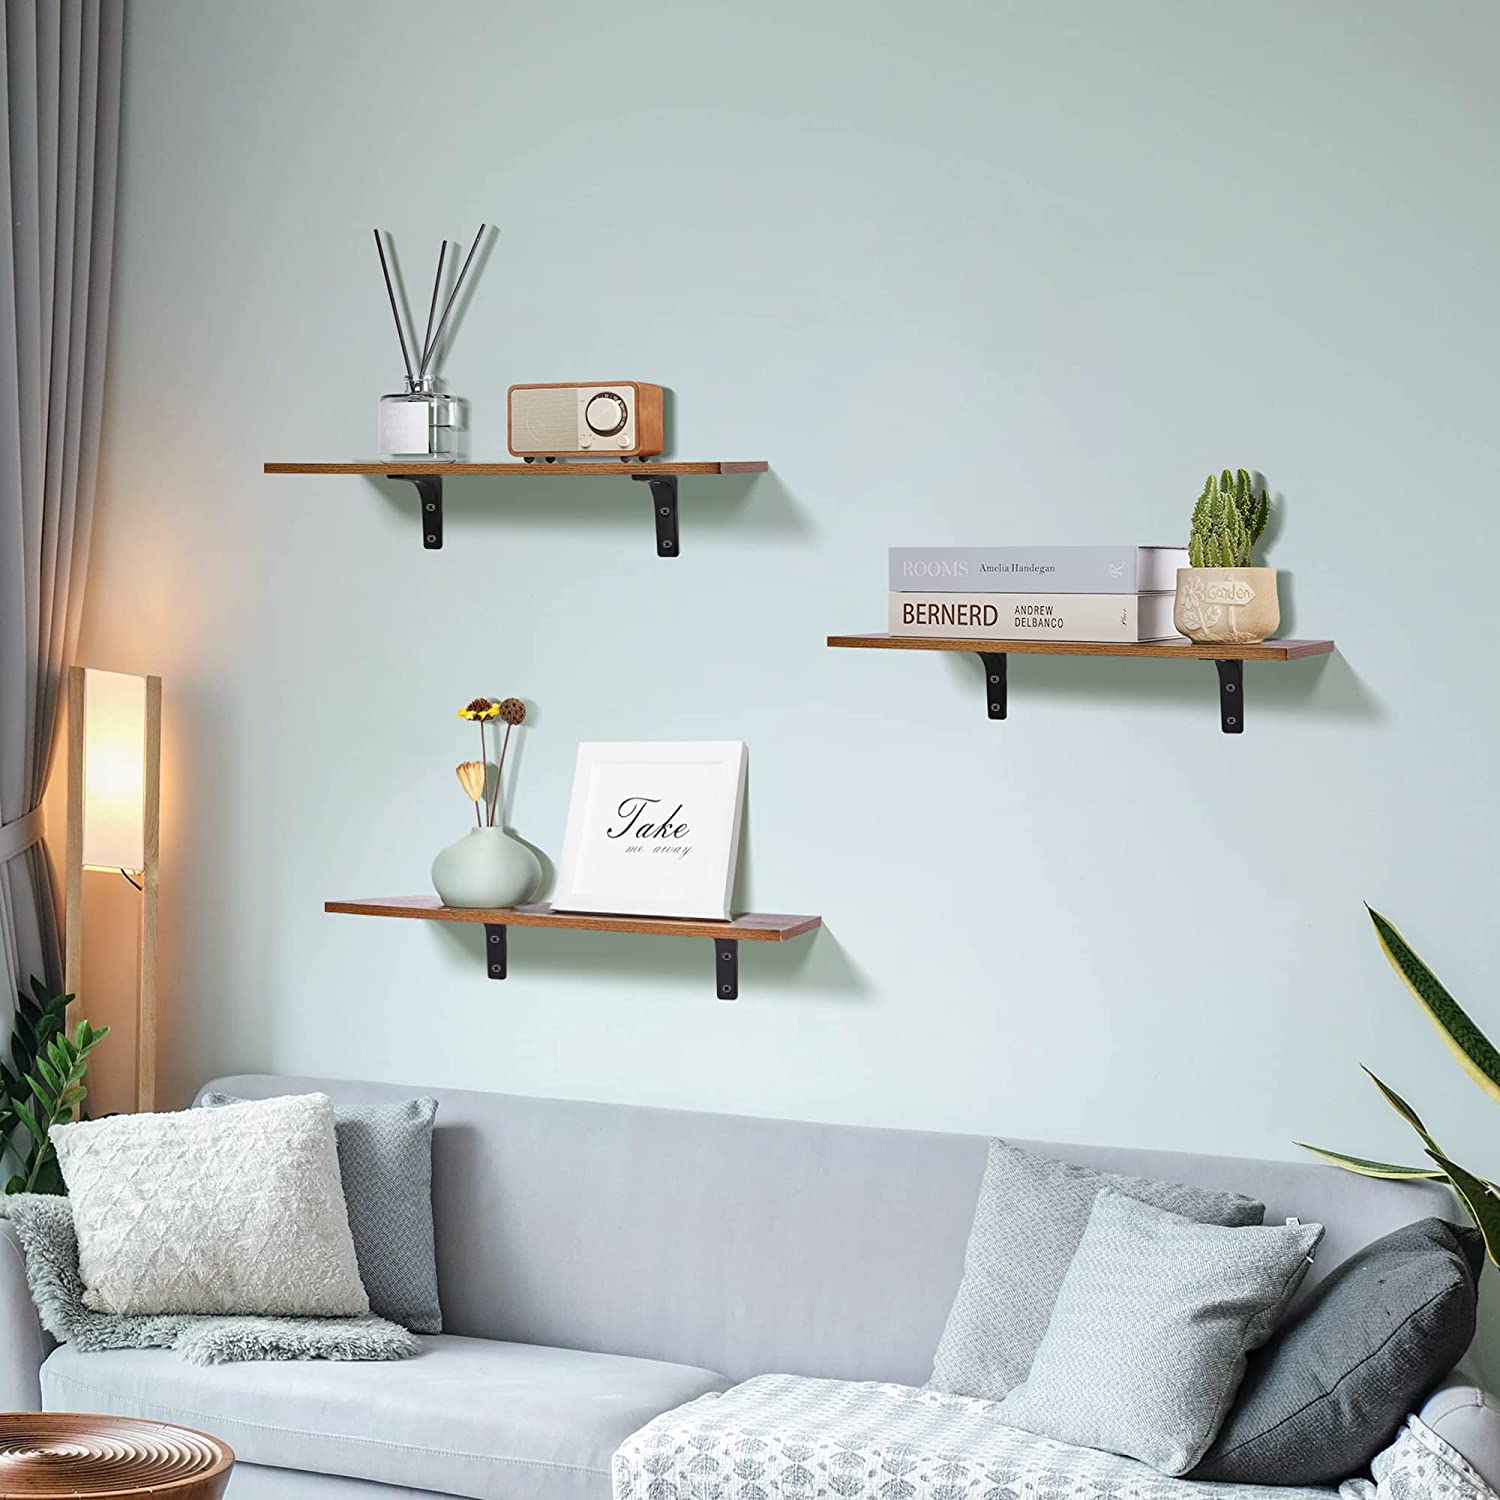 upsimples Floating Shelves for Wall Decor Storage, Black Wall Mounted  Shelves Set of 5, Sturdy Small Wood Shelves Hanging for Bedroom, Living  Room